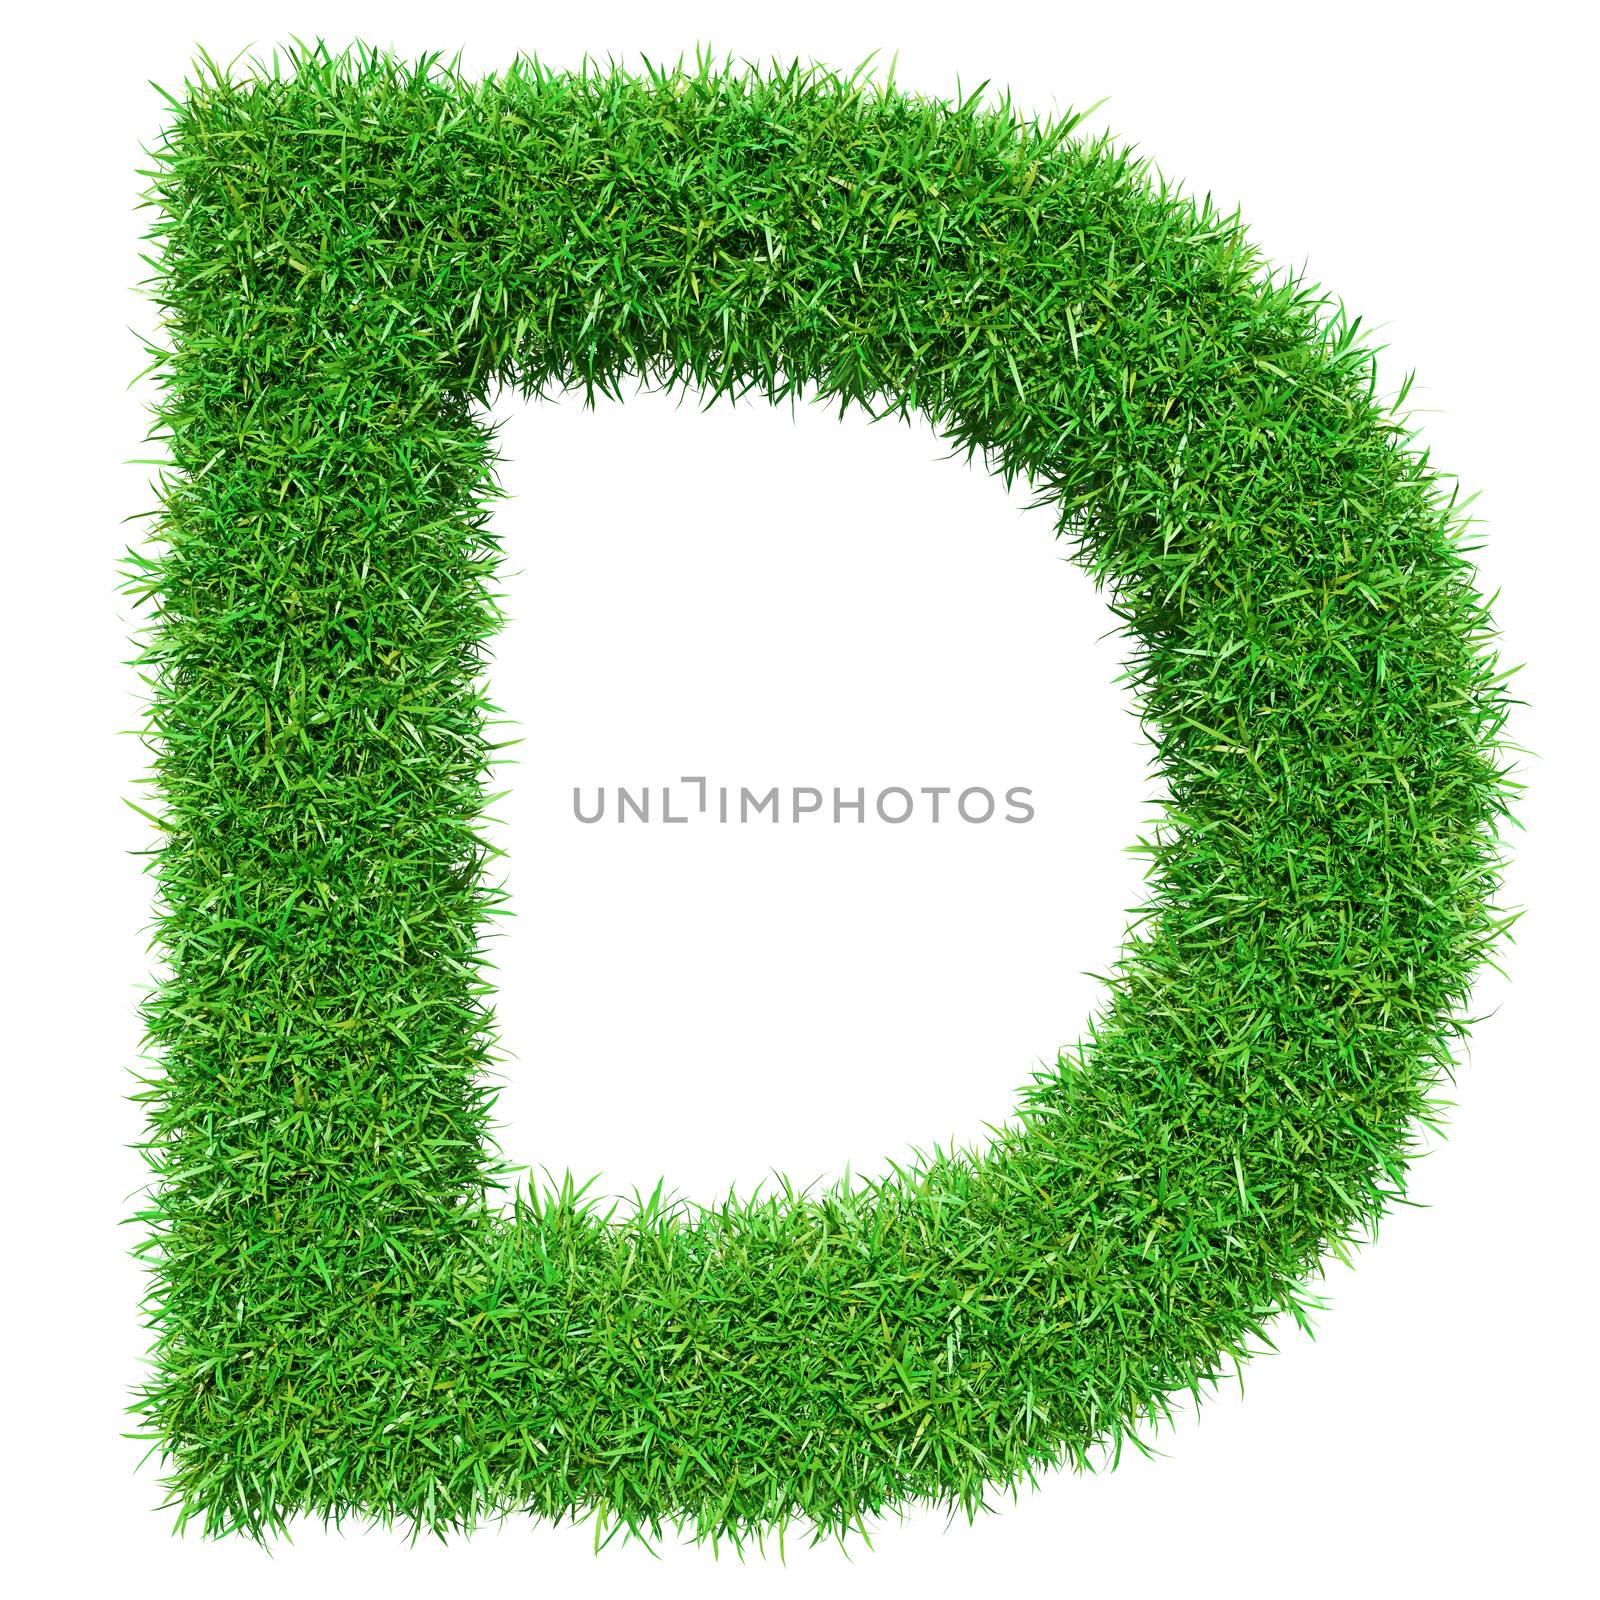 Green Grass Letter D. Isolated On White Background. Font For Your Design. 3D Illustration